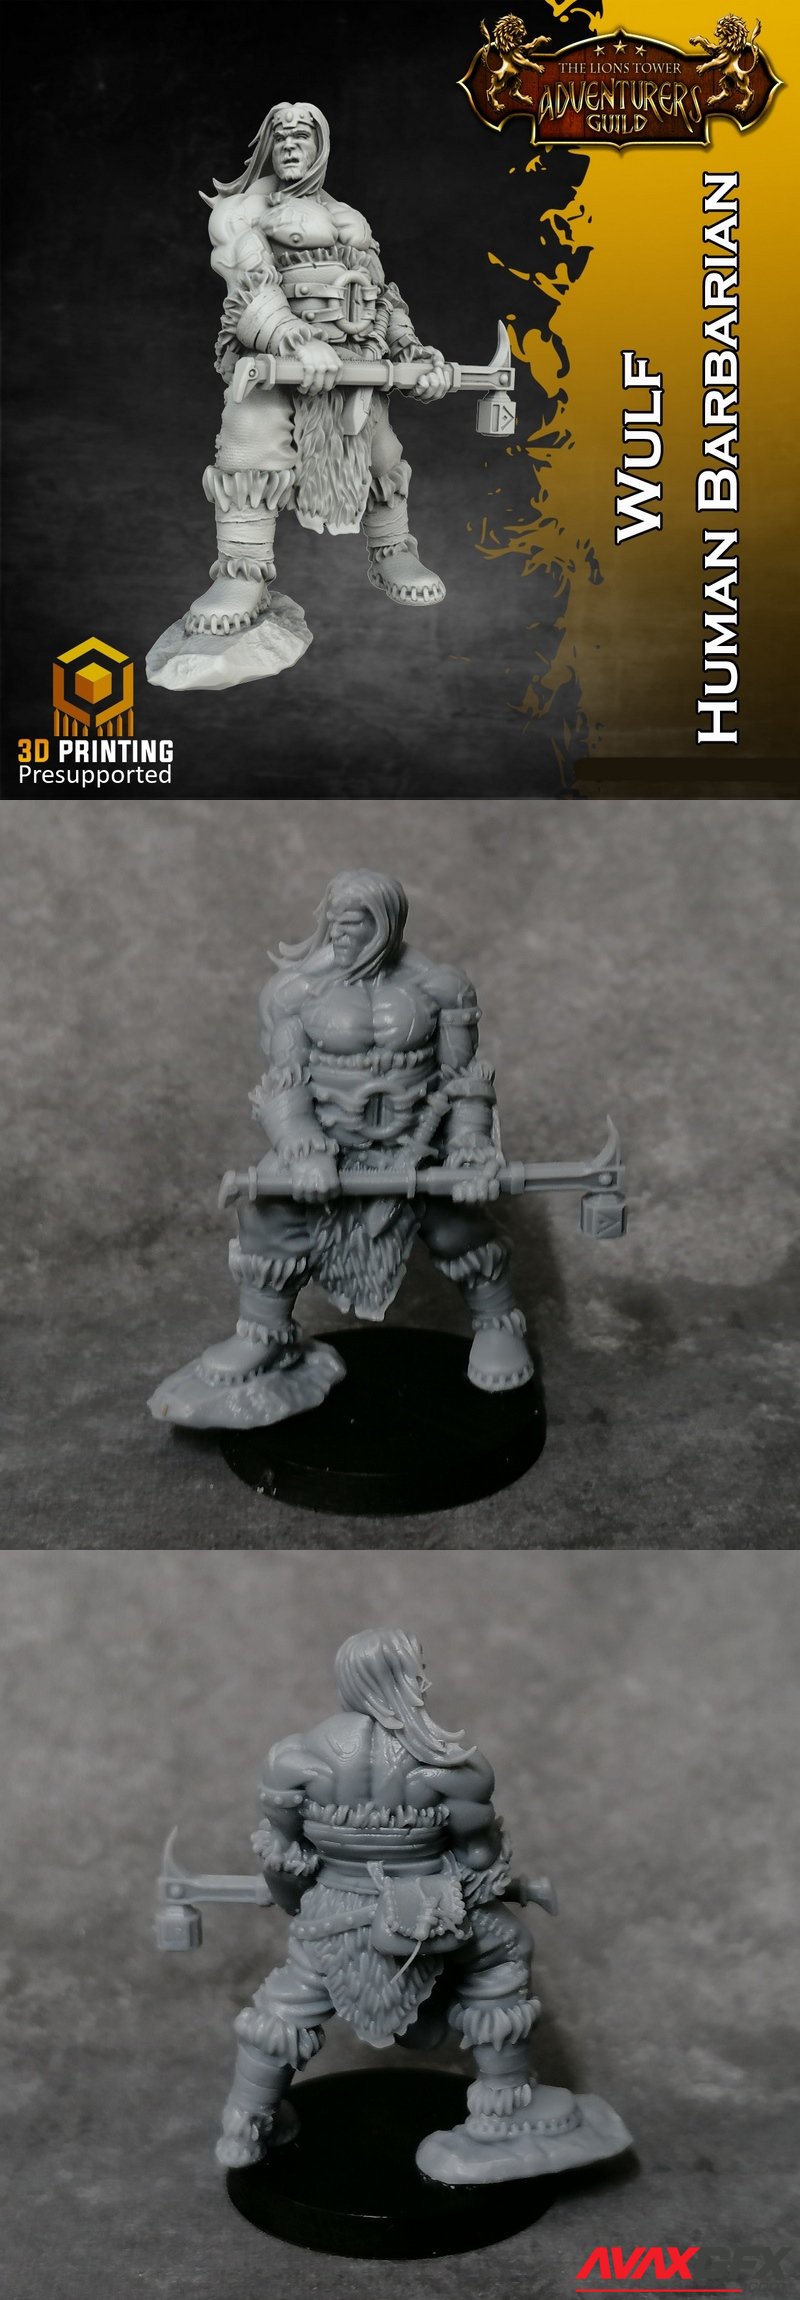 Heroes of the Dale - Wulf the Human Barbarian - 3D Print Model